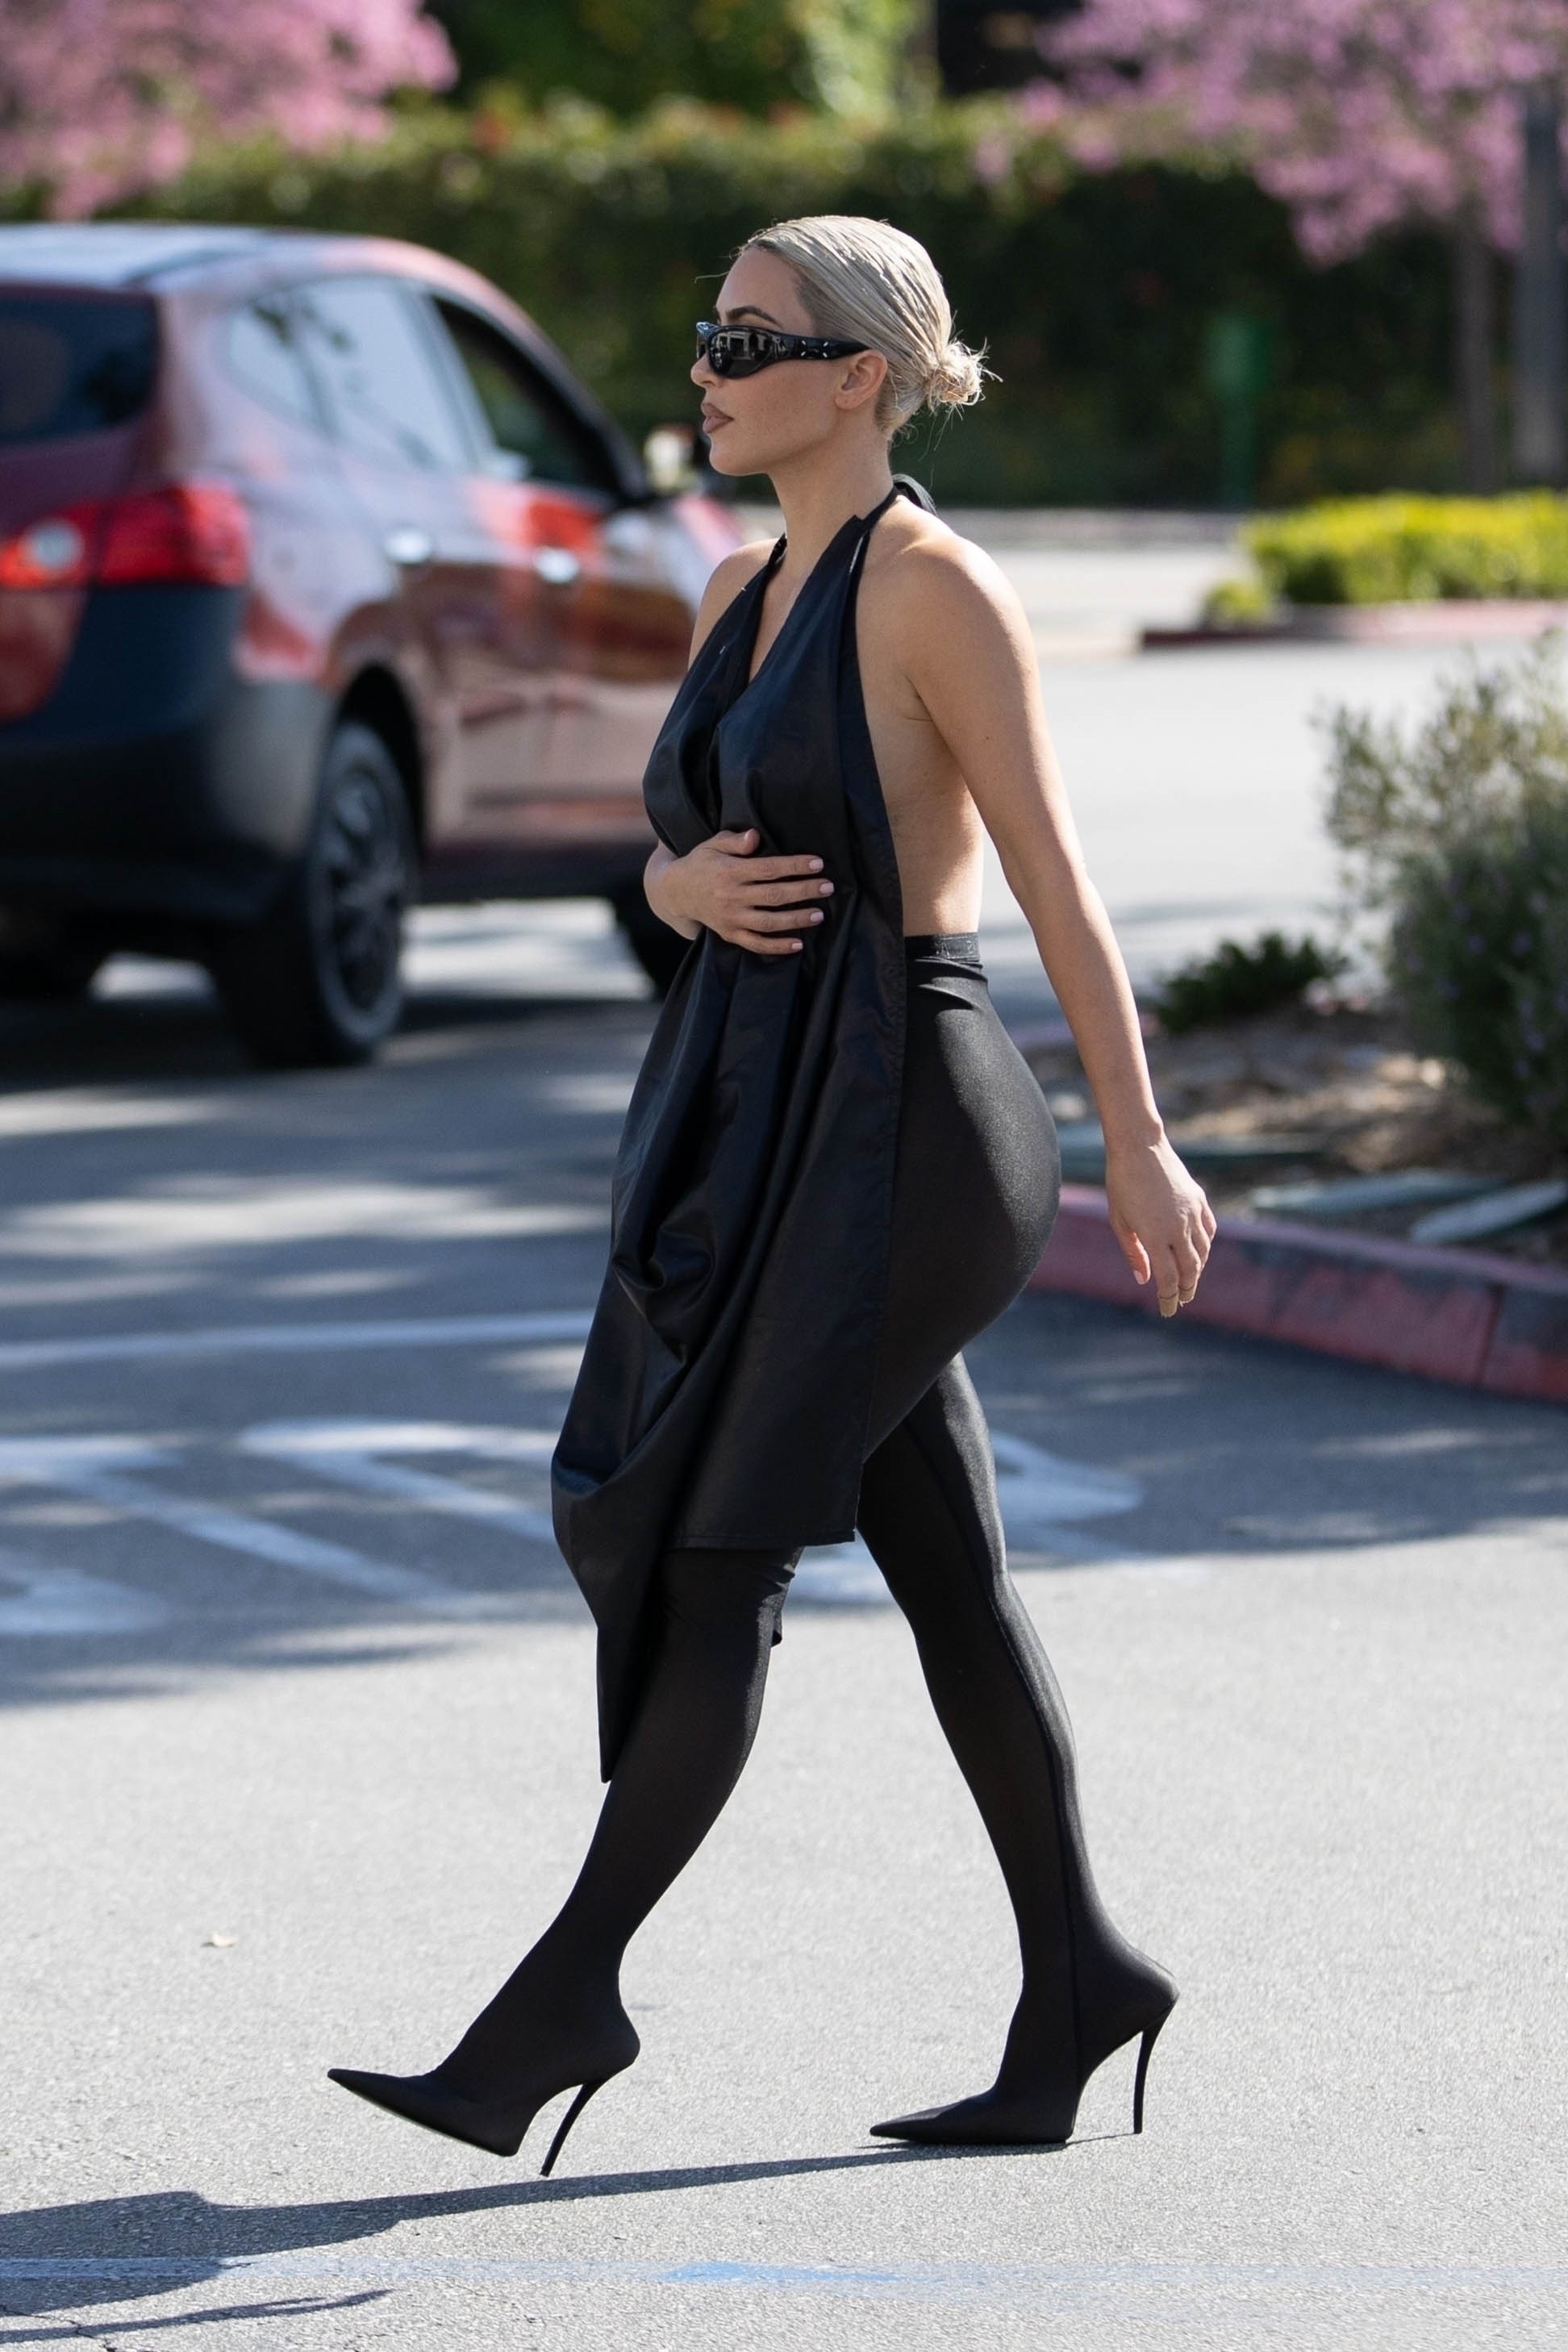 Kim was spotted wearing an all-black outfit with a short platinum-blonde haircut